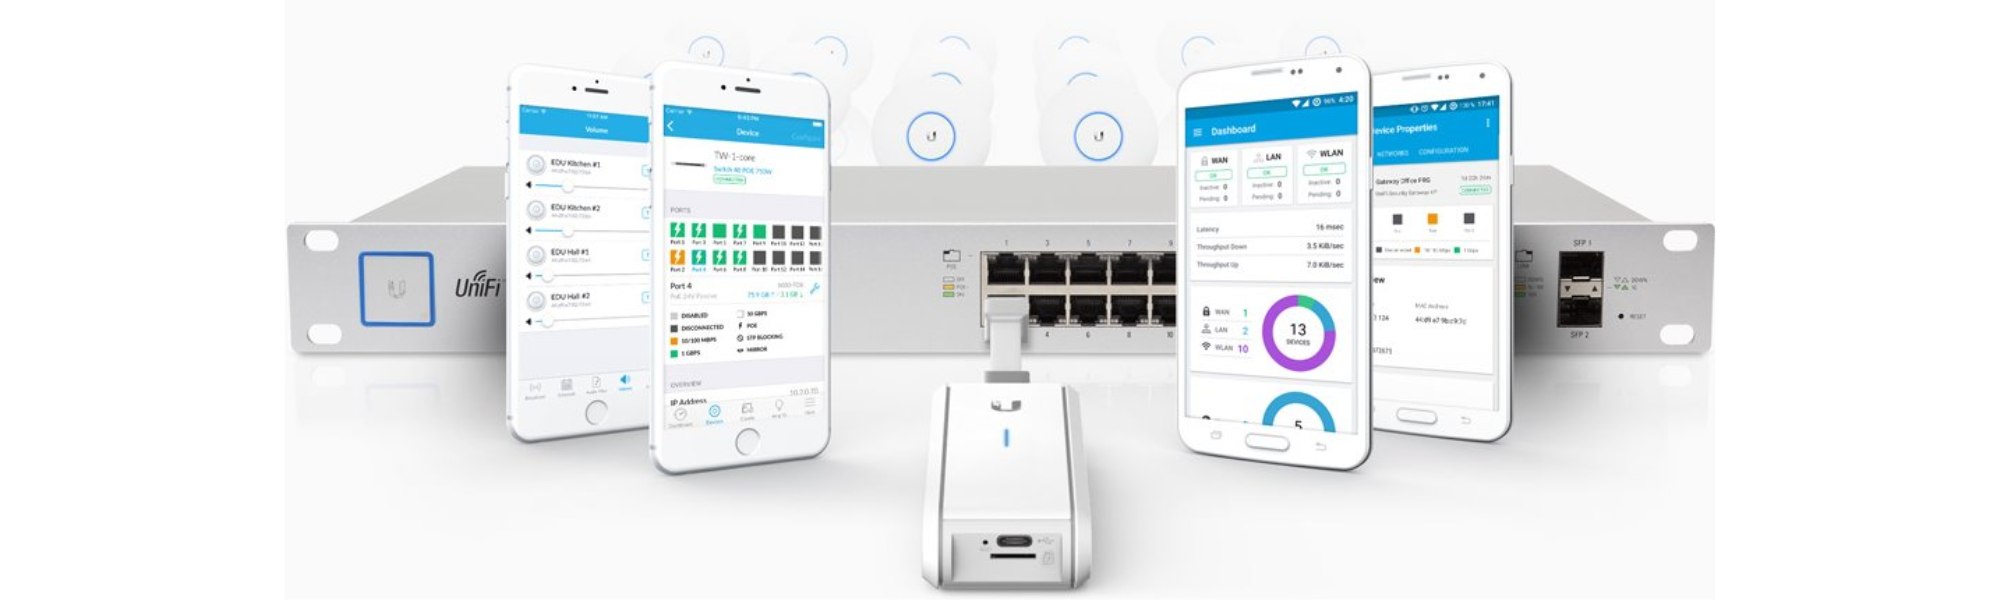 Ubiquiti Cloud Key: Easy-to-use network management tool.